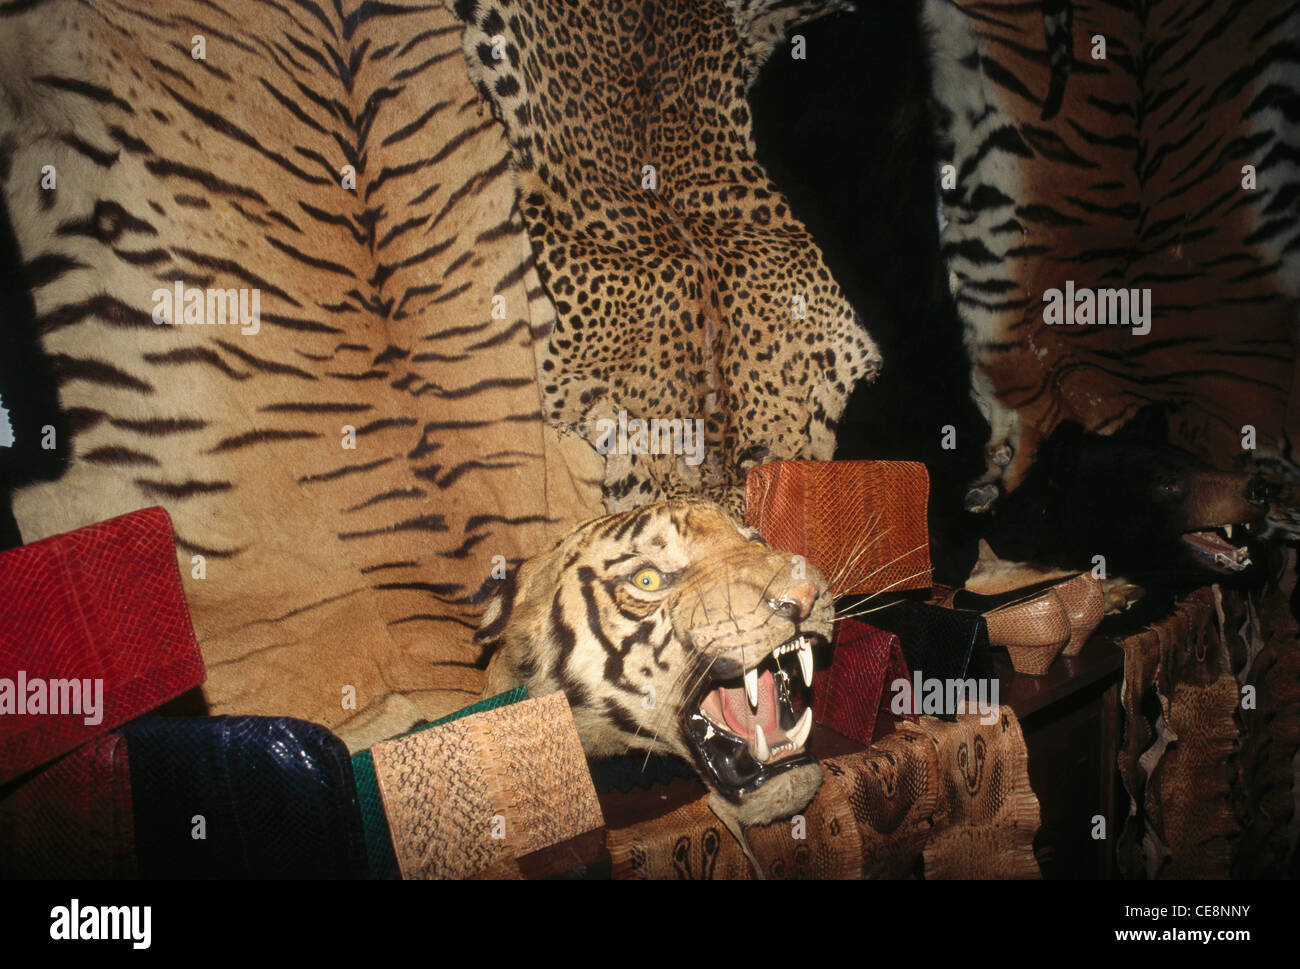 Skin and Furs of Tiger Wildlife products illegal India Stock Photo